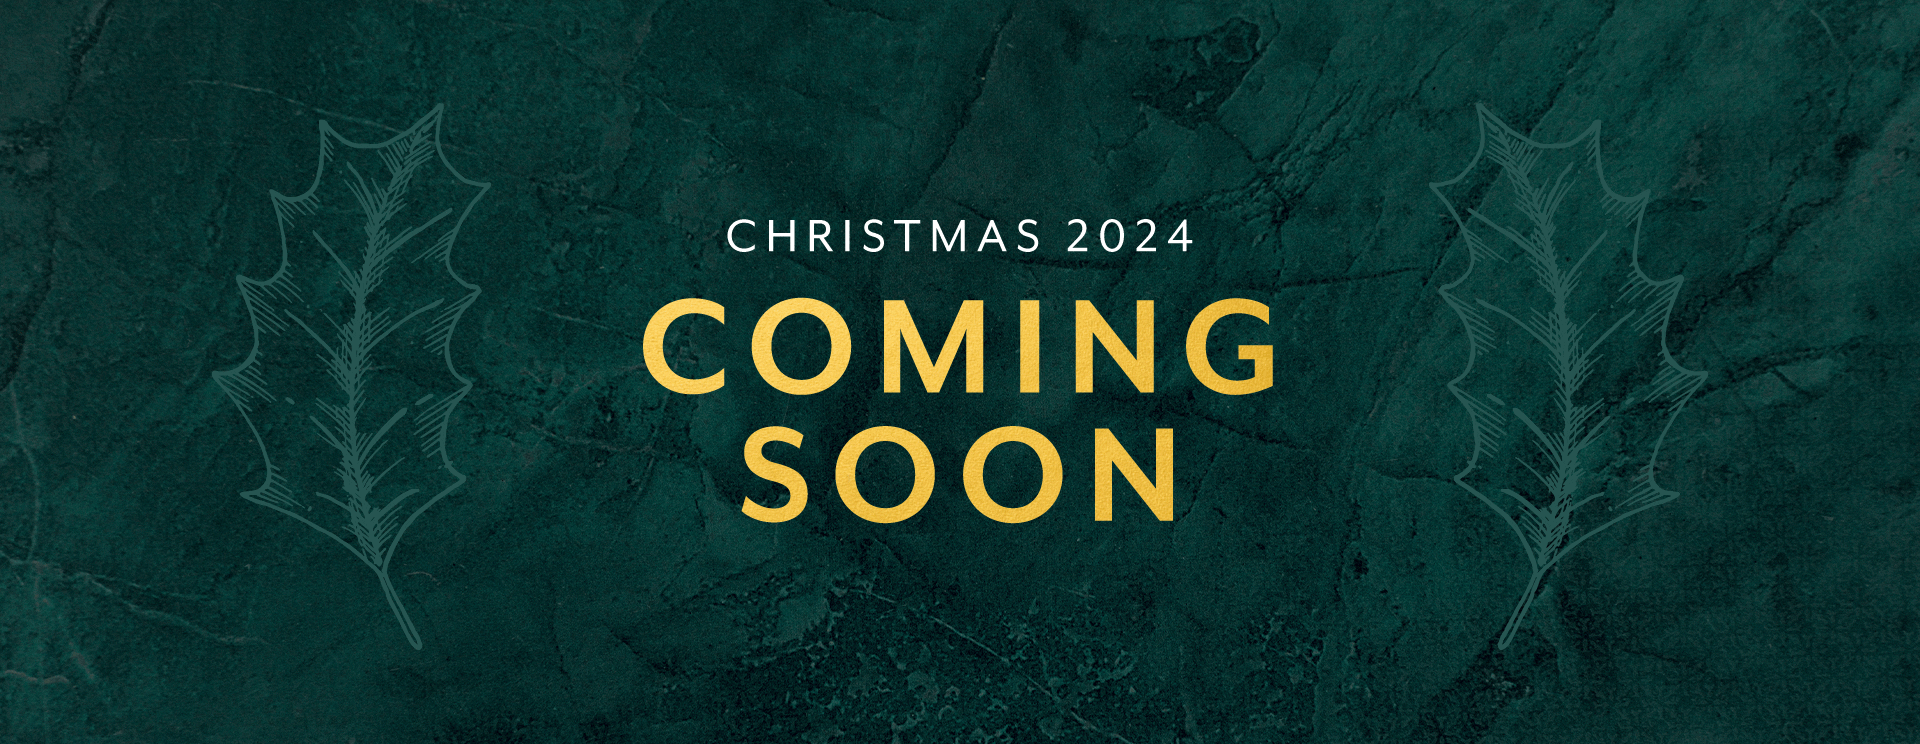 Christmas 2024 at Great Linford